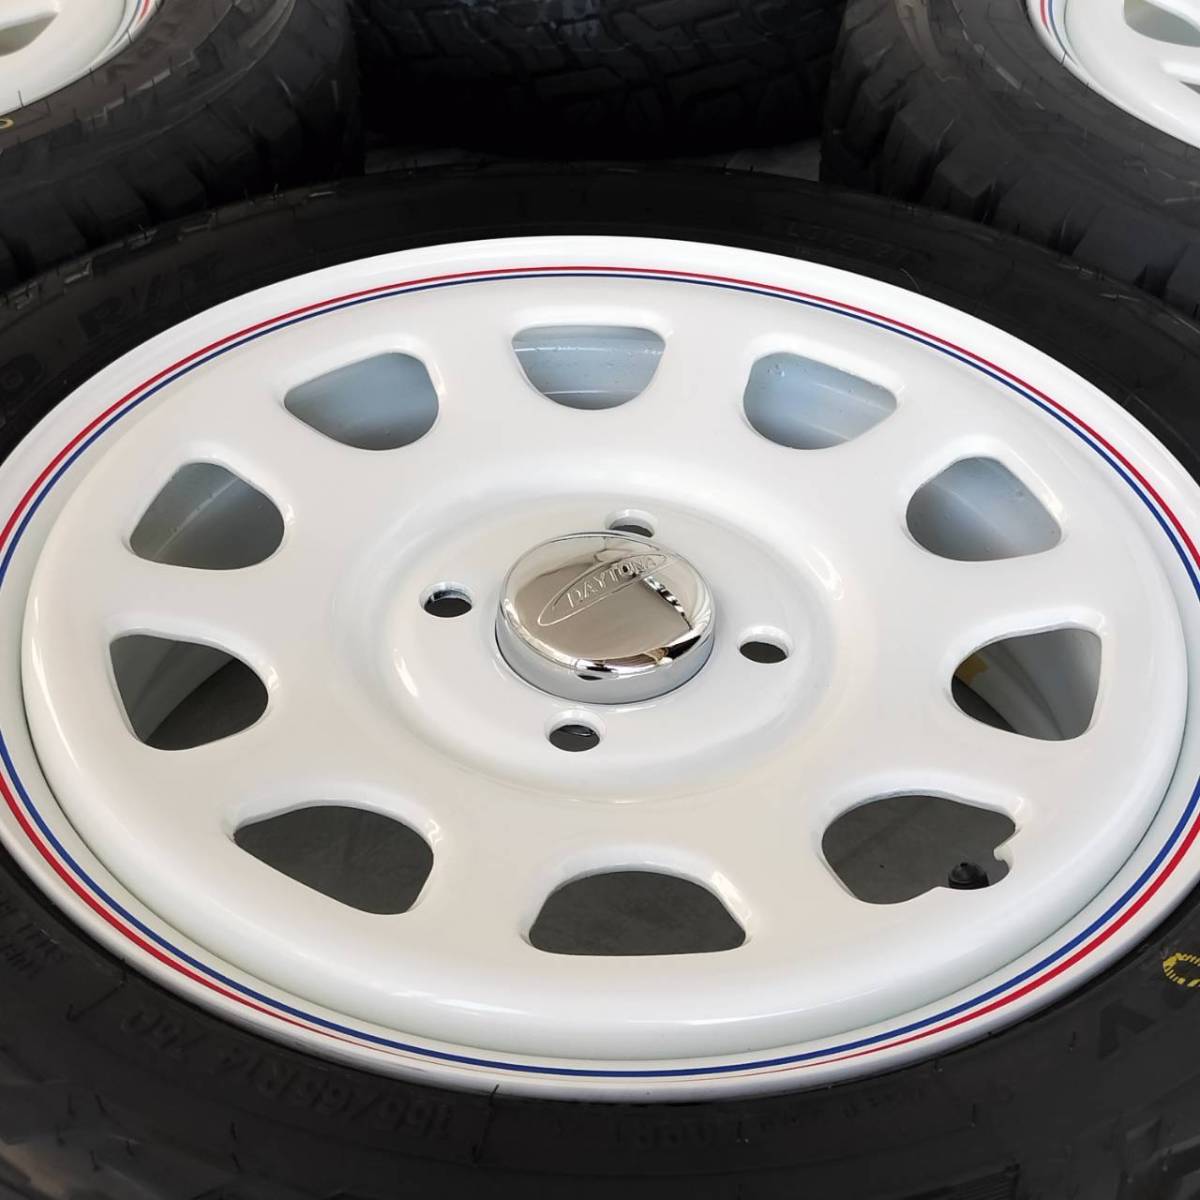  new goods Daytona 14-5.0J+42 4-100 white tire attaching 4ps.@SET 155/65R14 Toyo OPENCOUNTRY R/T light for automobile NBOX Every (W2426)